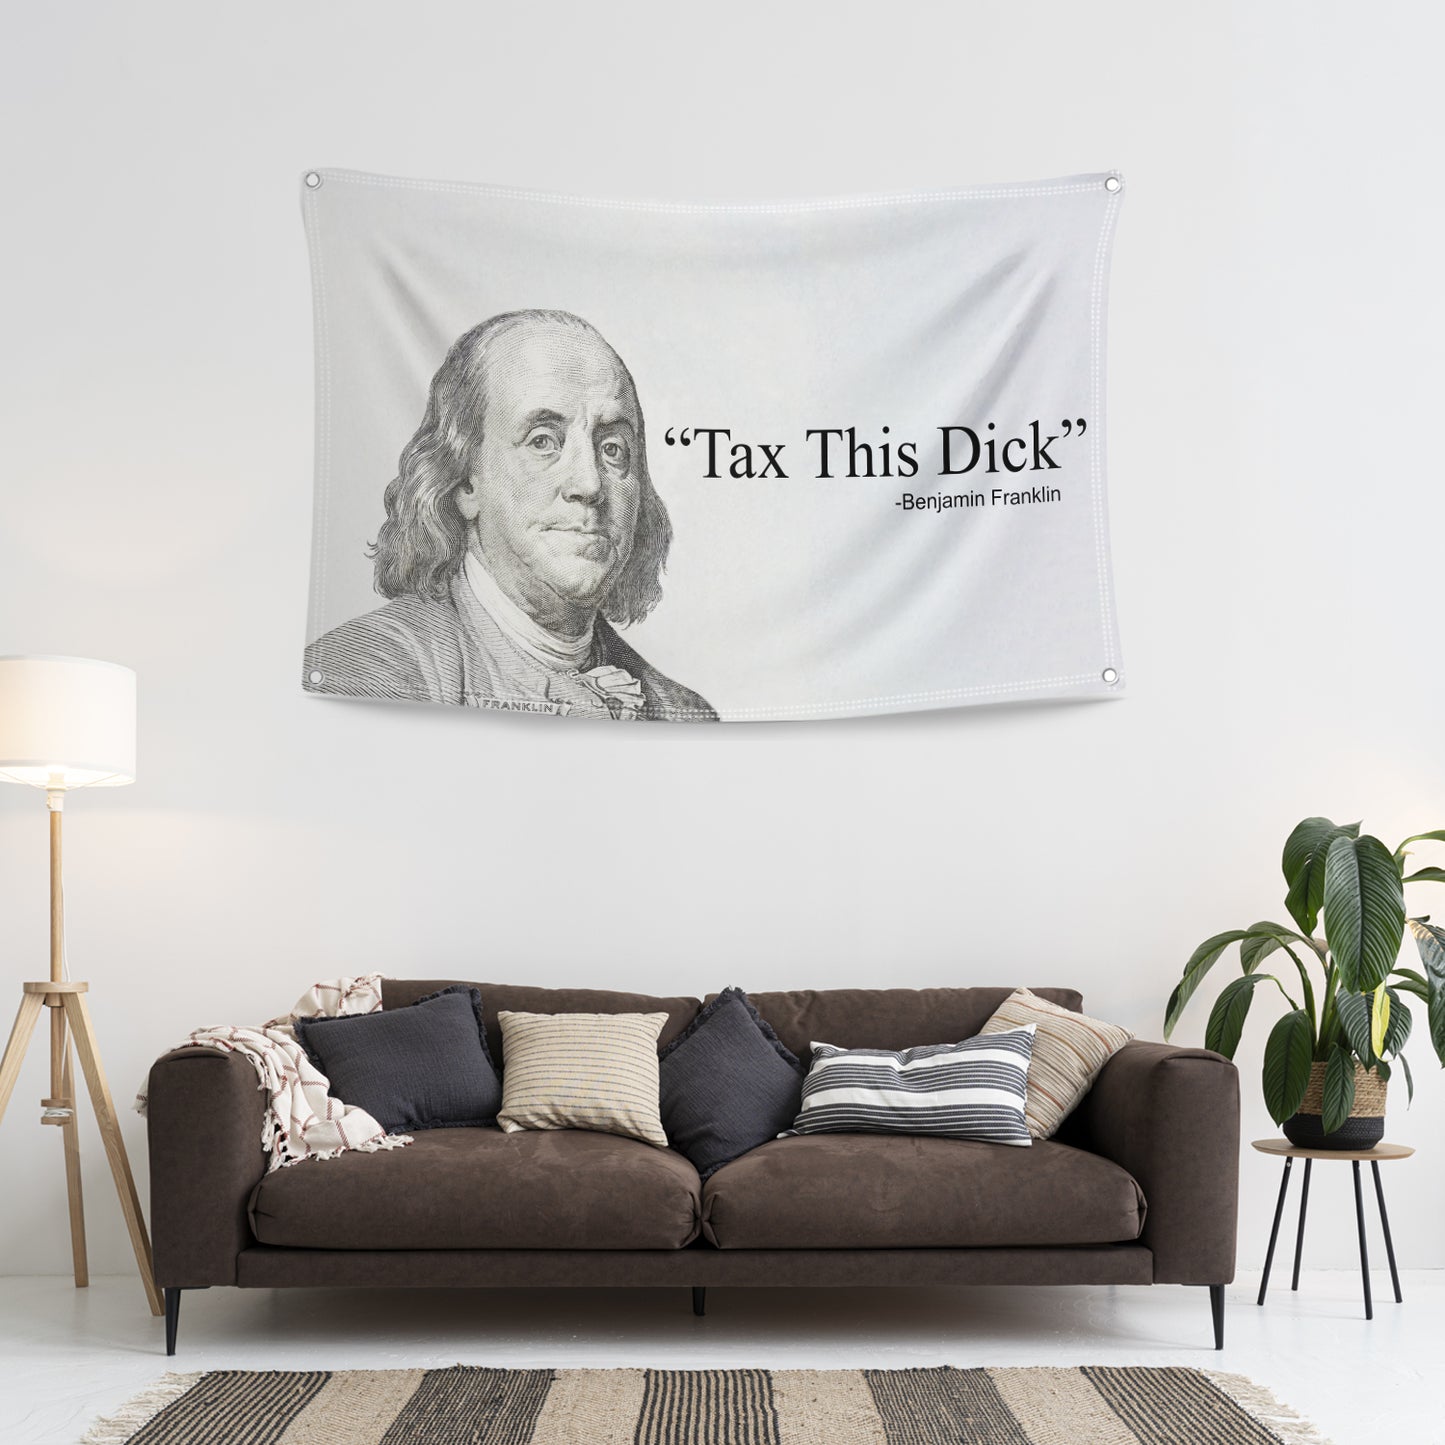 Tax This Dick Flag